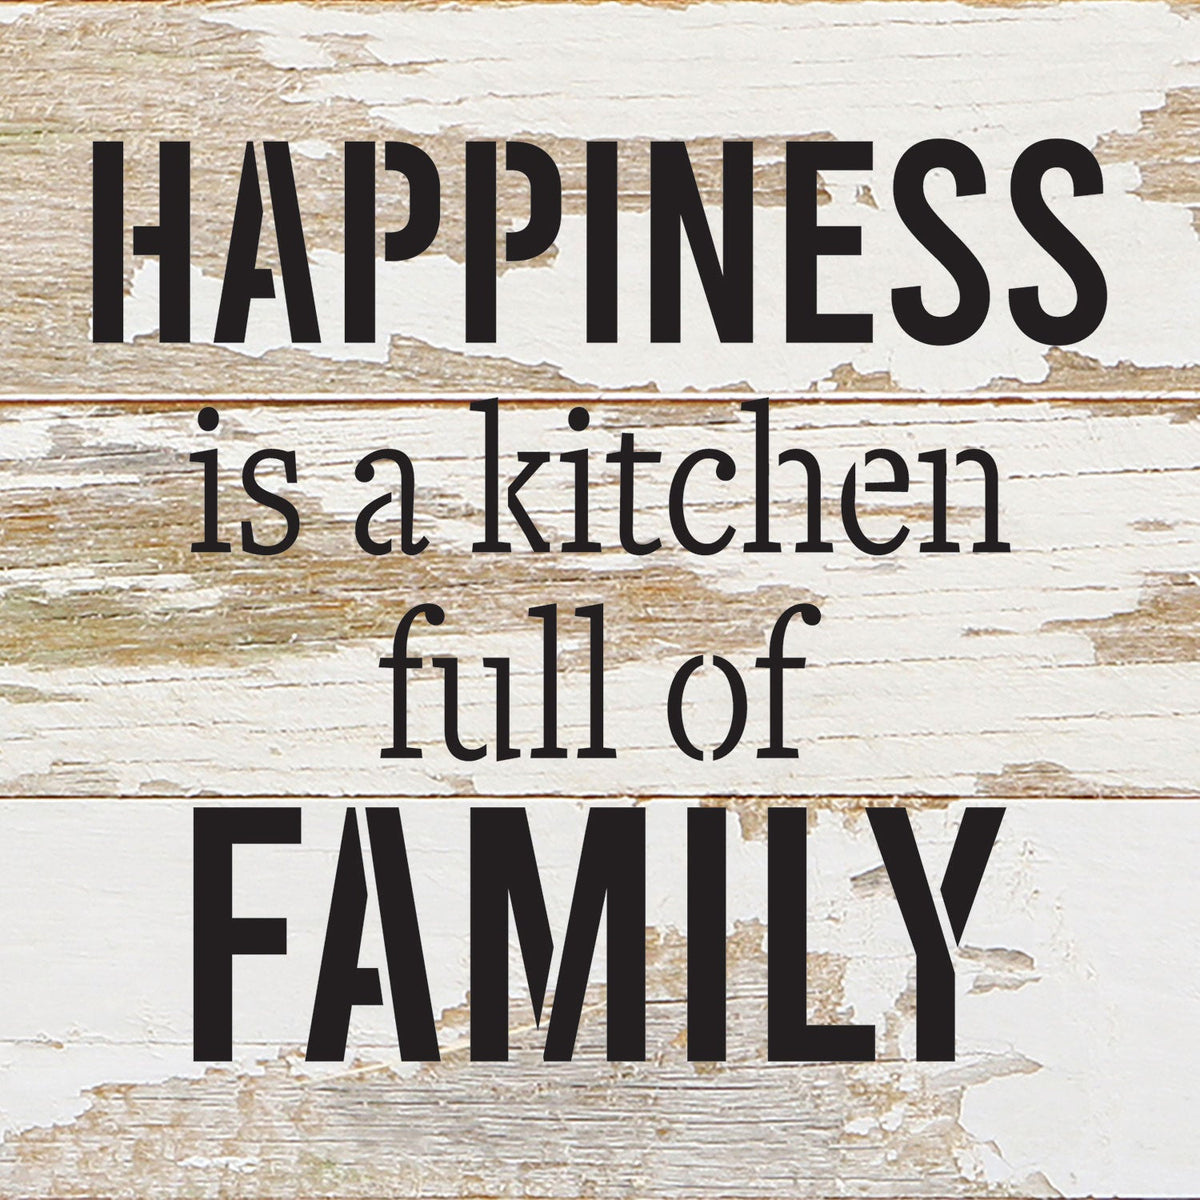 Happiness is a kitchen full of family / 6x6 Reclaimed Wood Wall Decor Sign